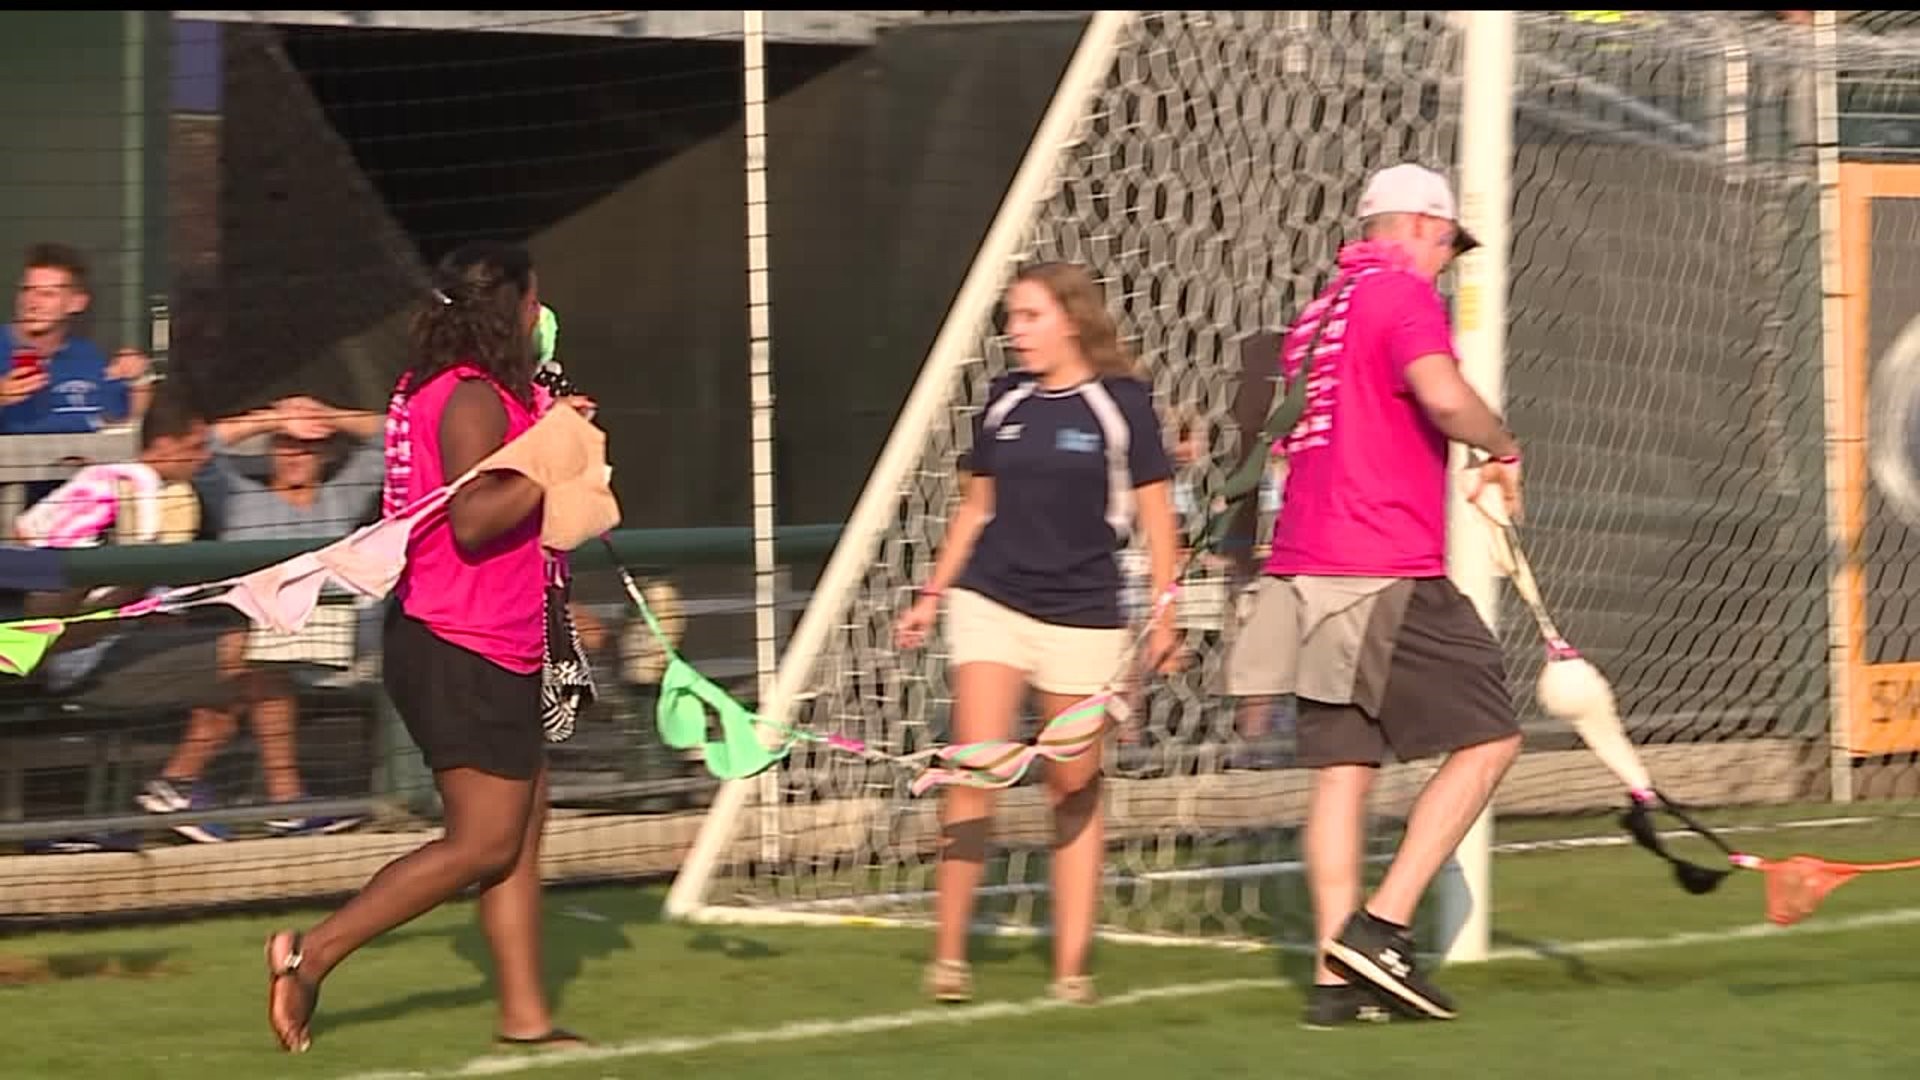 Breast cancer survivors lead human chain of bras from City Island into Harrisburg